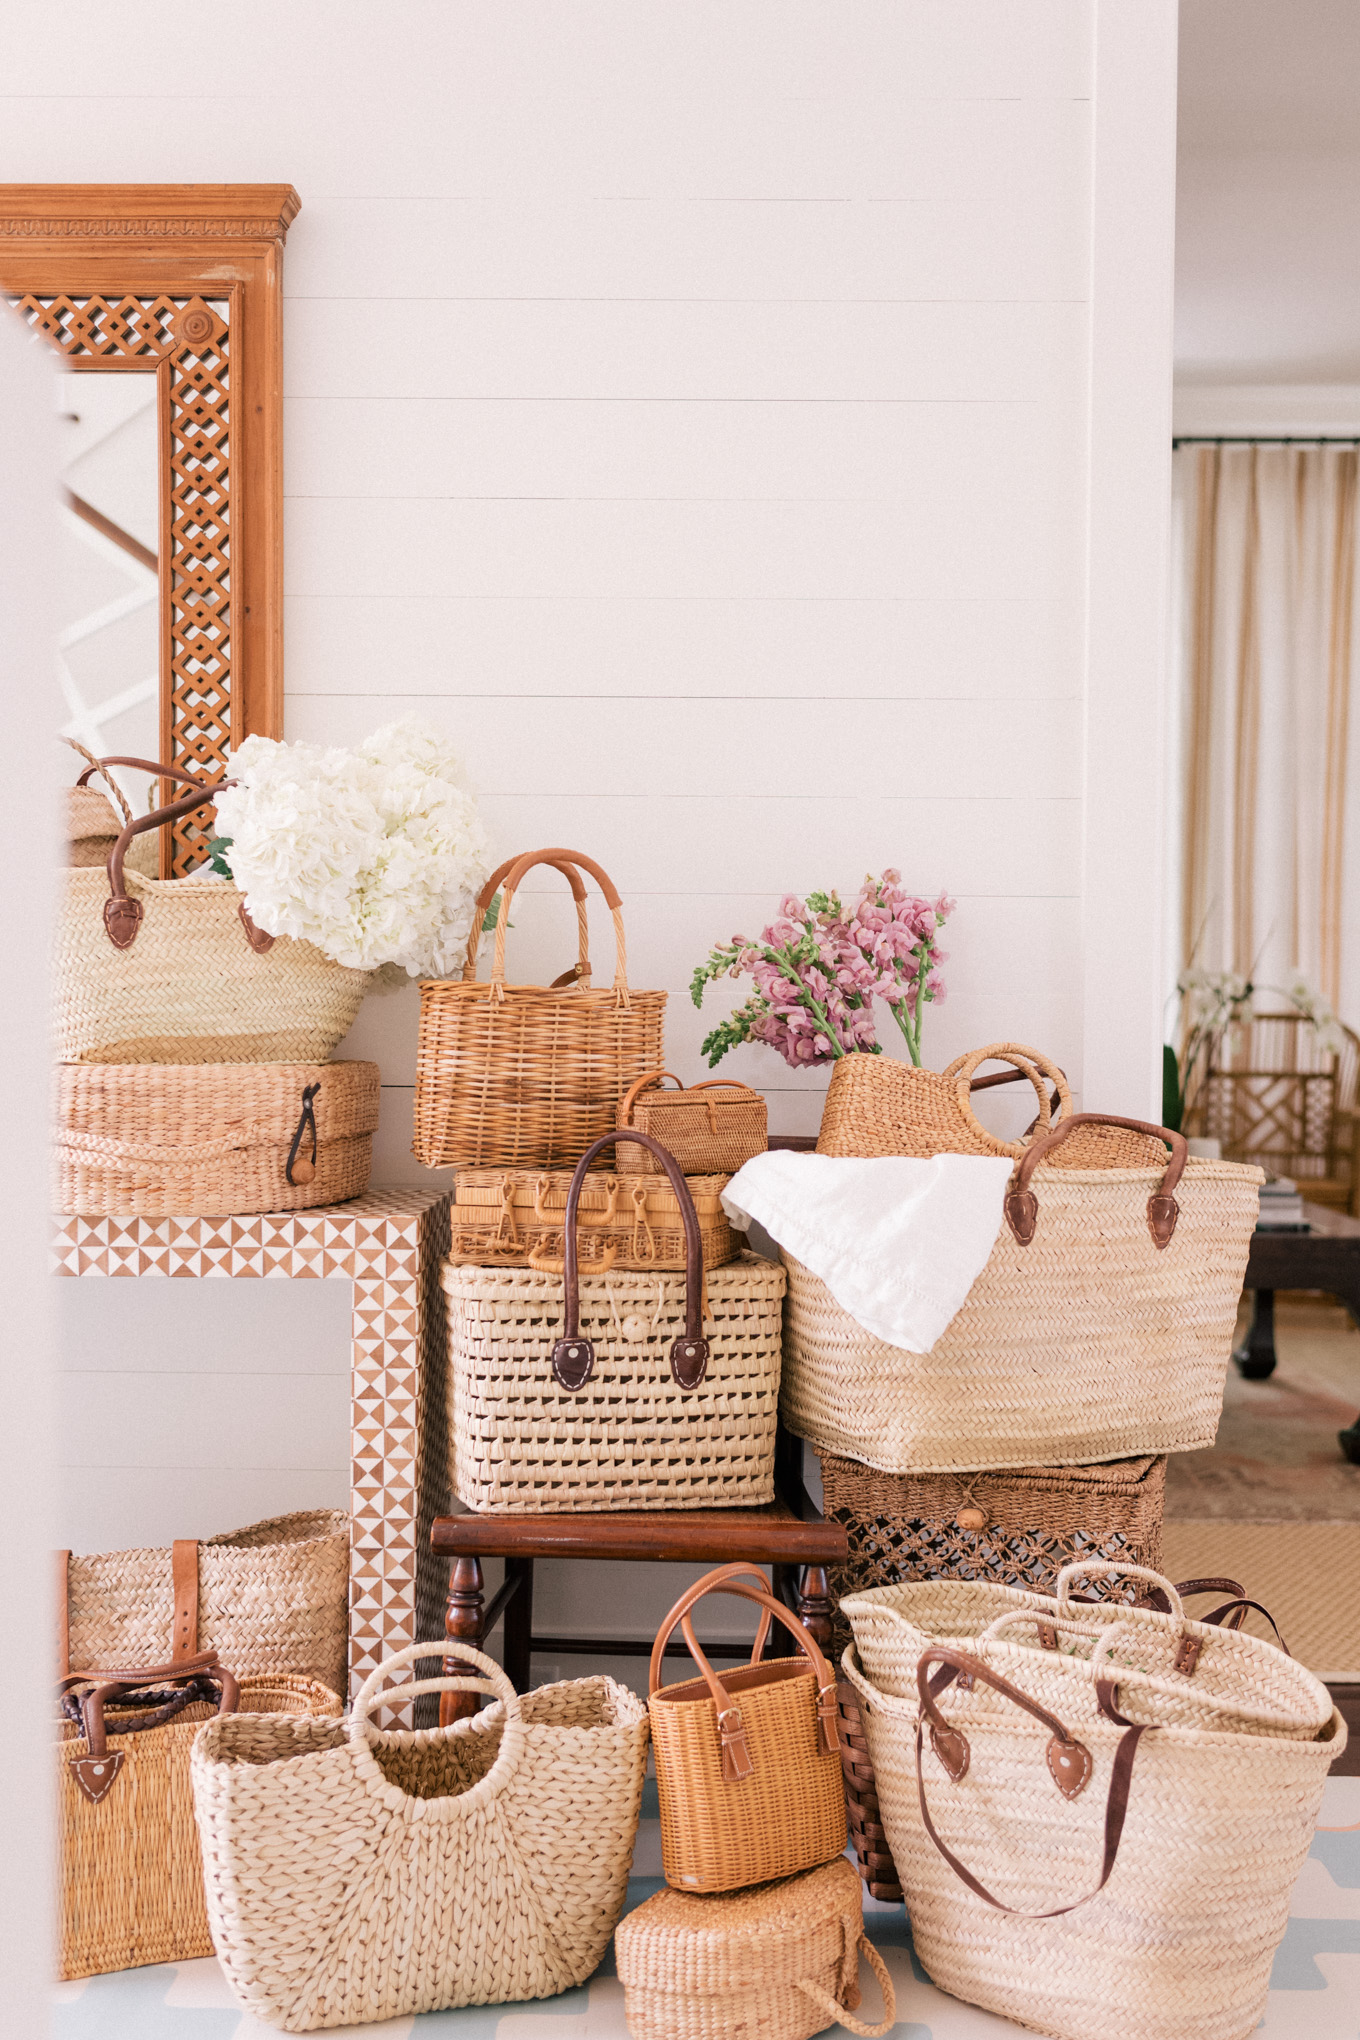 My picks for the best French market bags & baskets